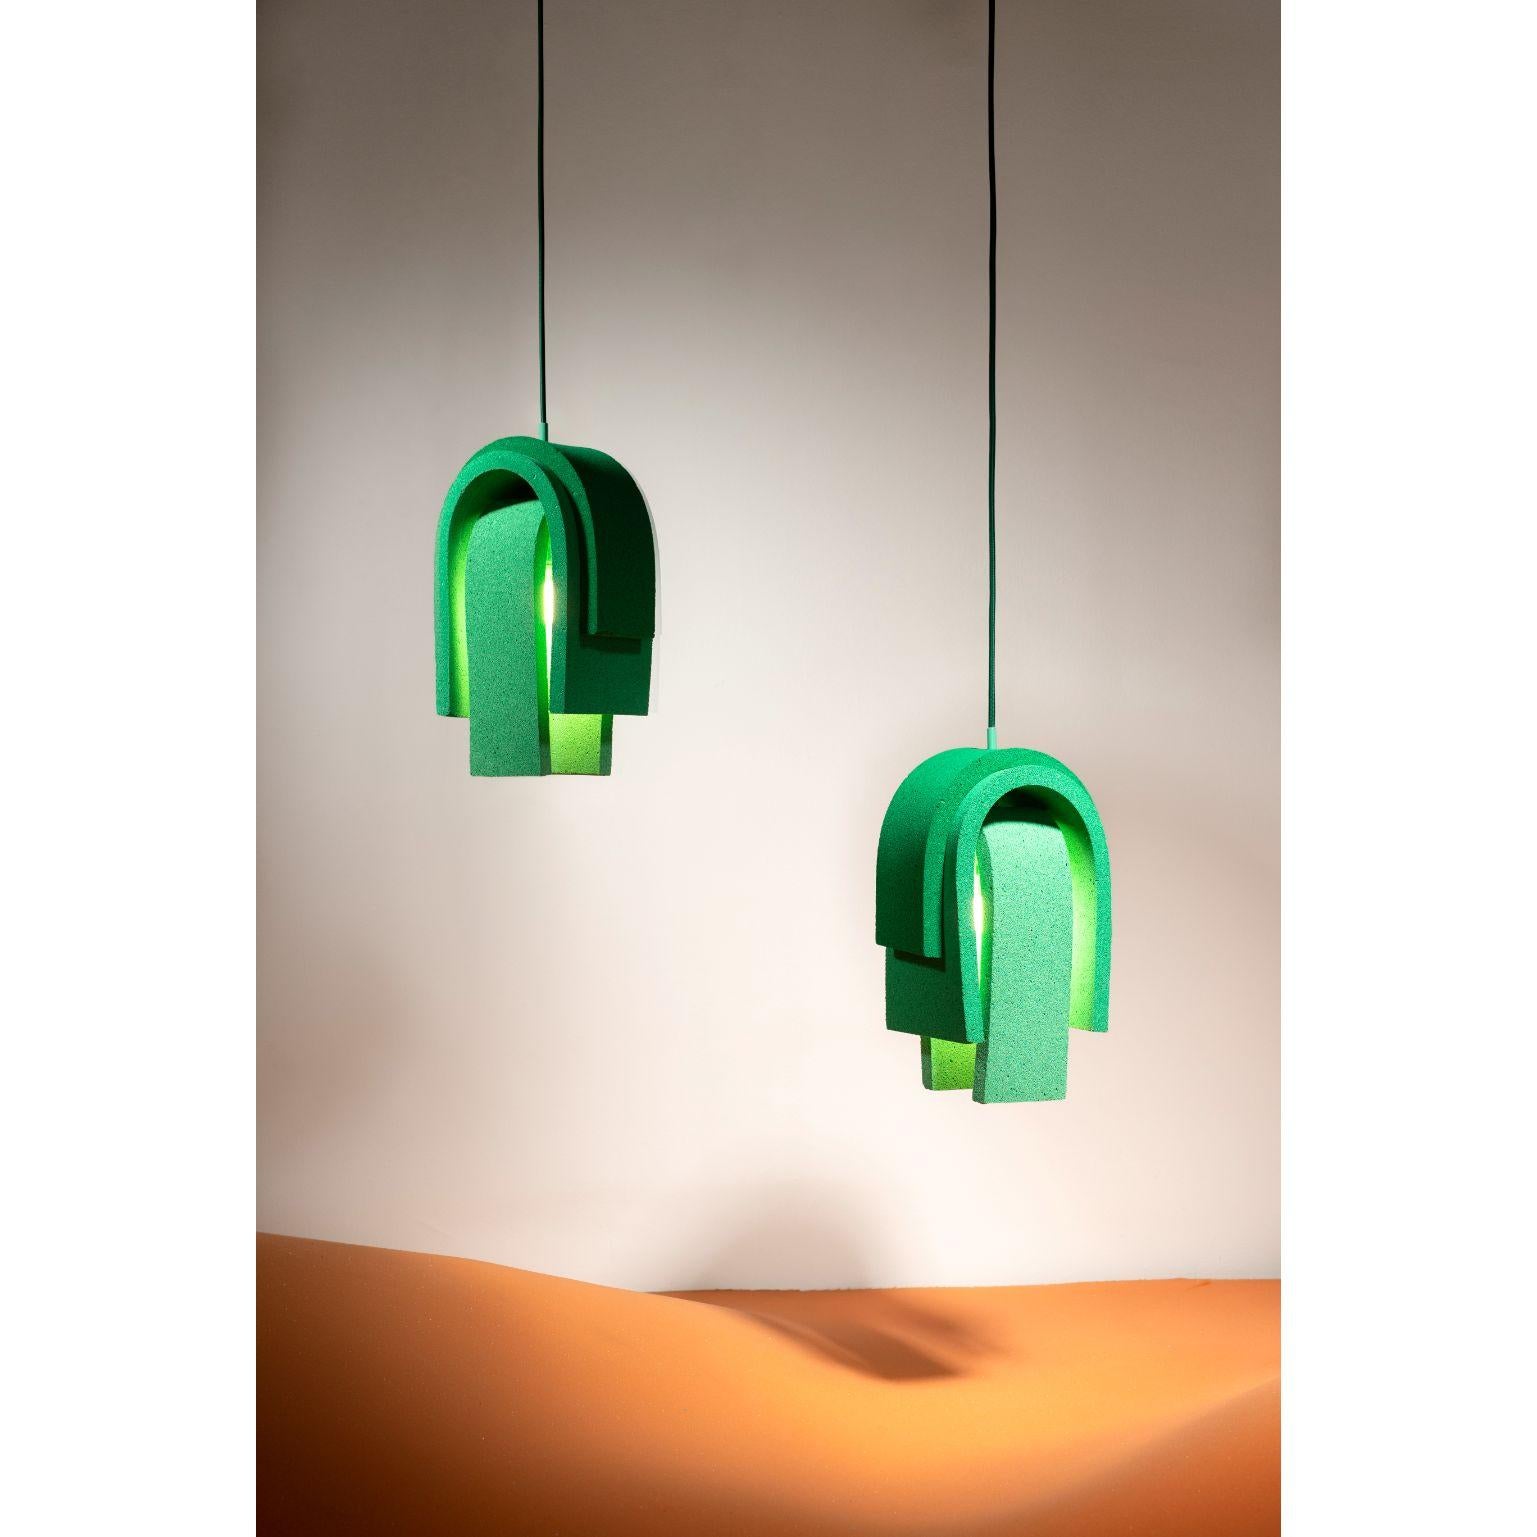 D33 - pendent by Cultivado Em Casa
Dimensions: 24 x 15 x 35 cm
Materials: D33 foam, acrylic paint, acrylic resin, carbon steel.

Also Available: different colors, please contact us 

All our lamps can be wired according to each country. If